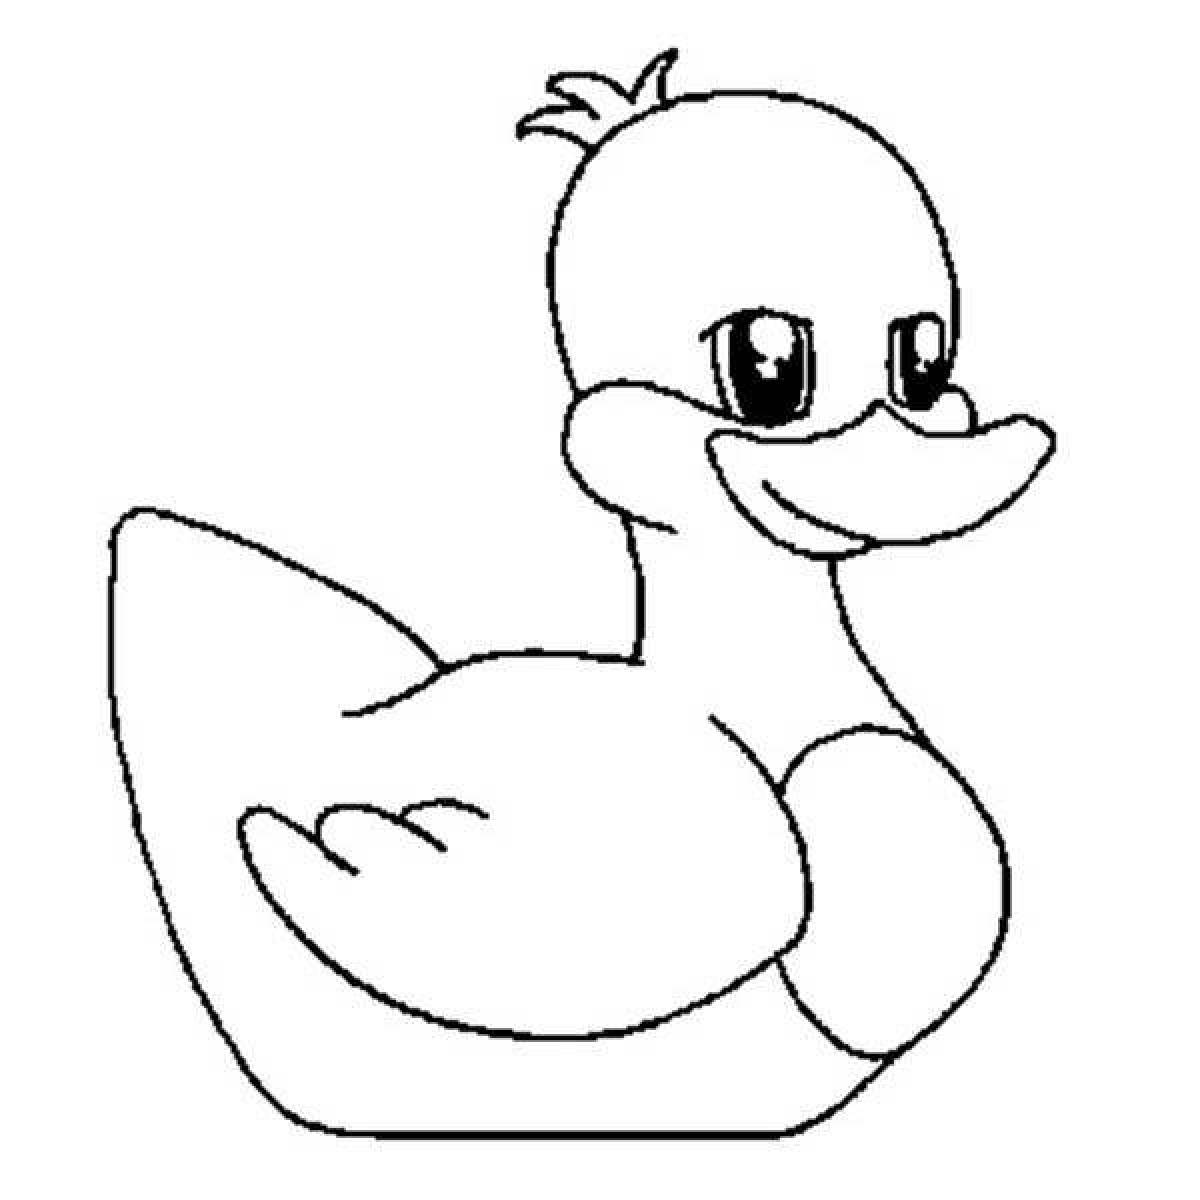 Colorful bright Lolofan duck coloring book